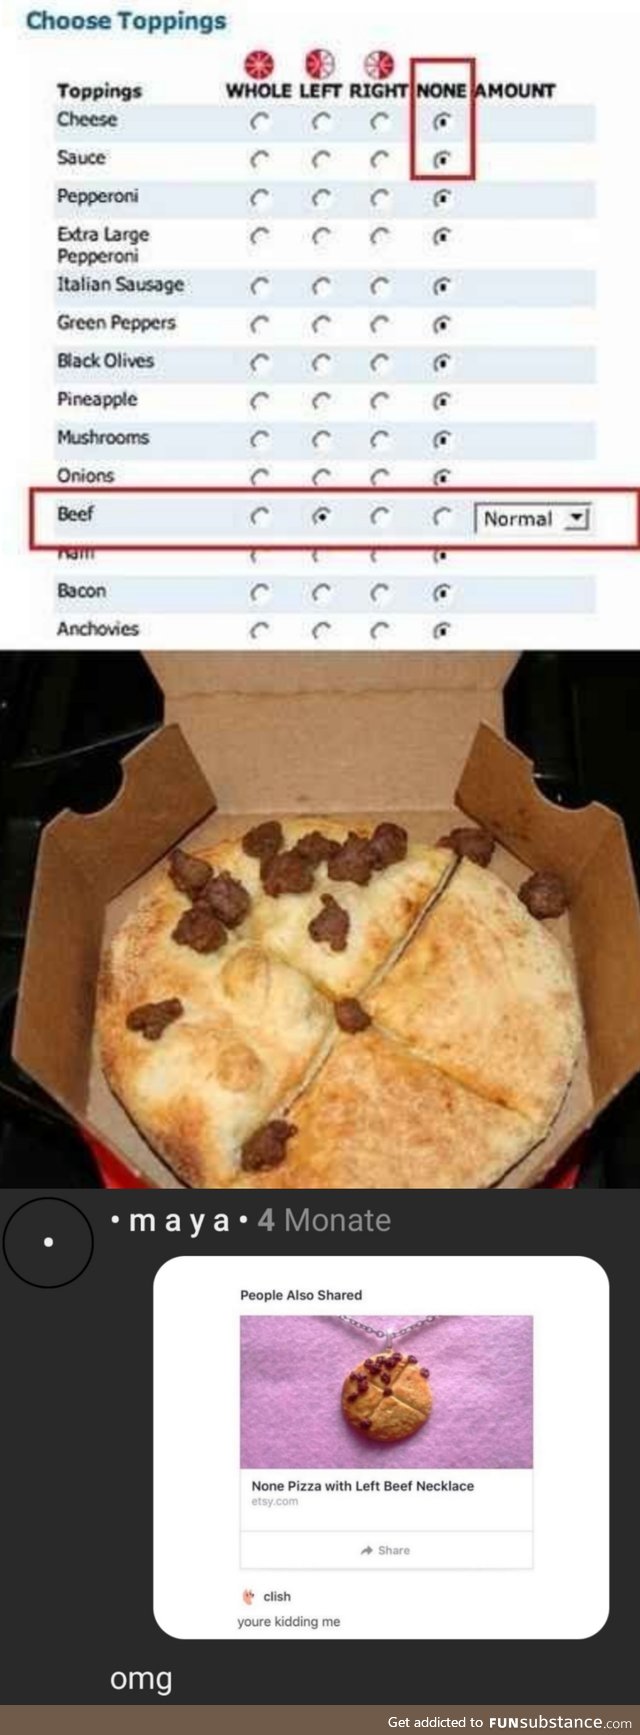 None pizza with left beef